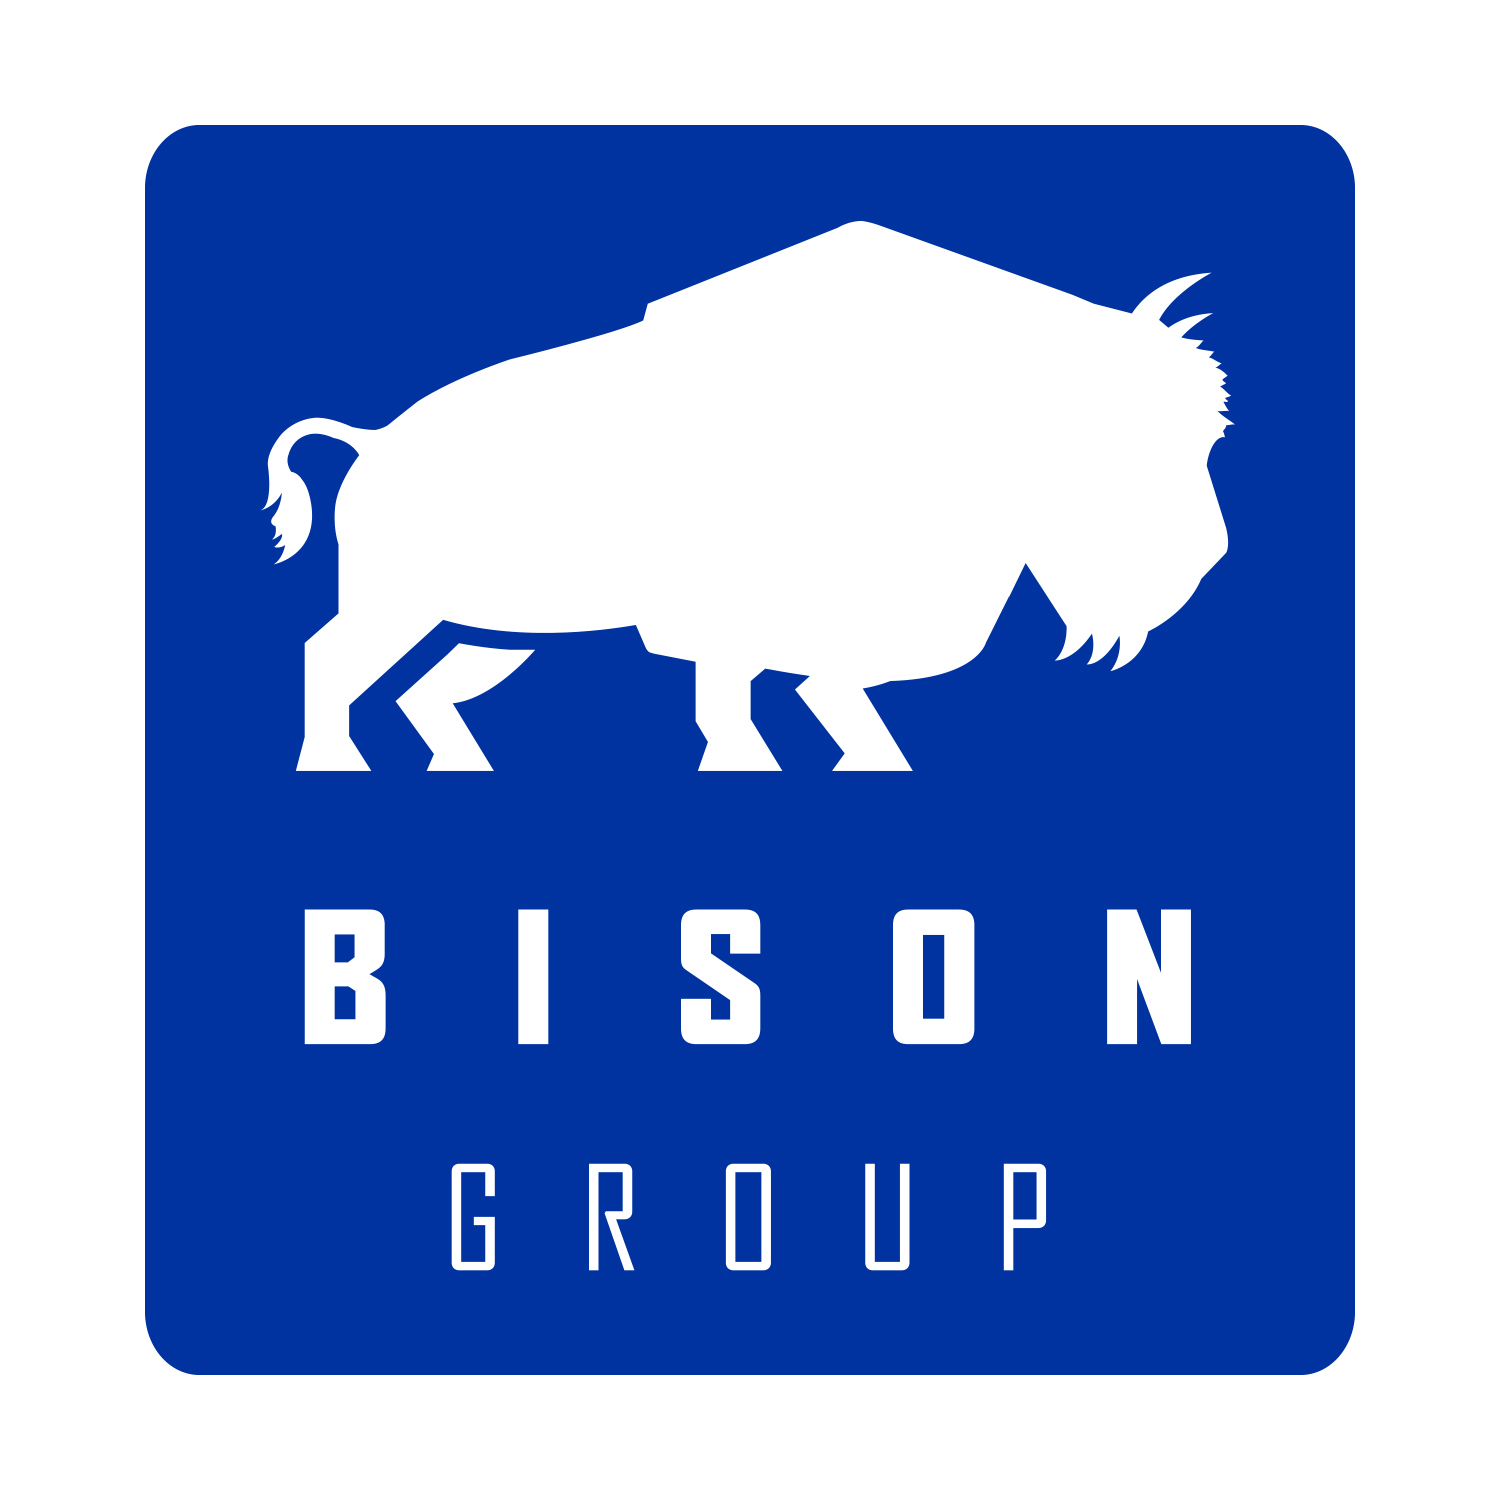 The Bison Group